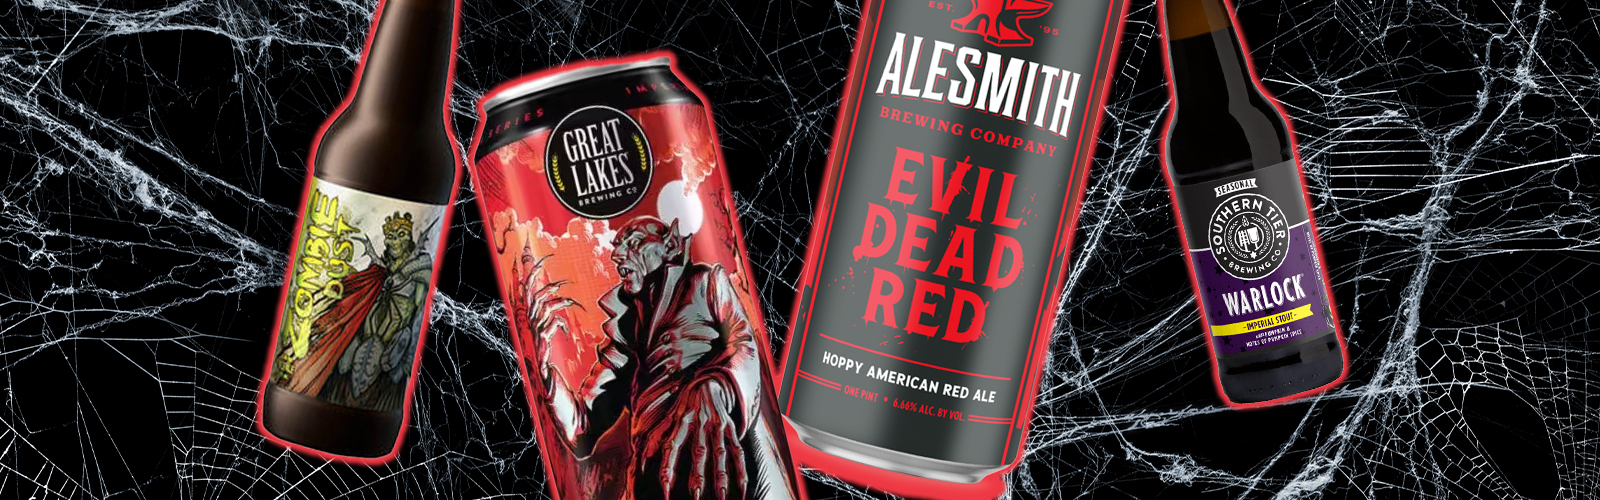 3 Floyds/Great Lakes/AleSmith/Southern Tier/istock/Uproxx